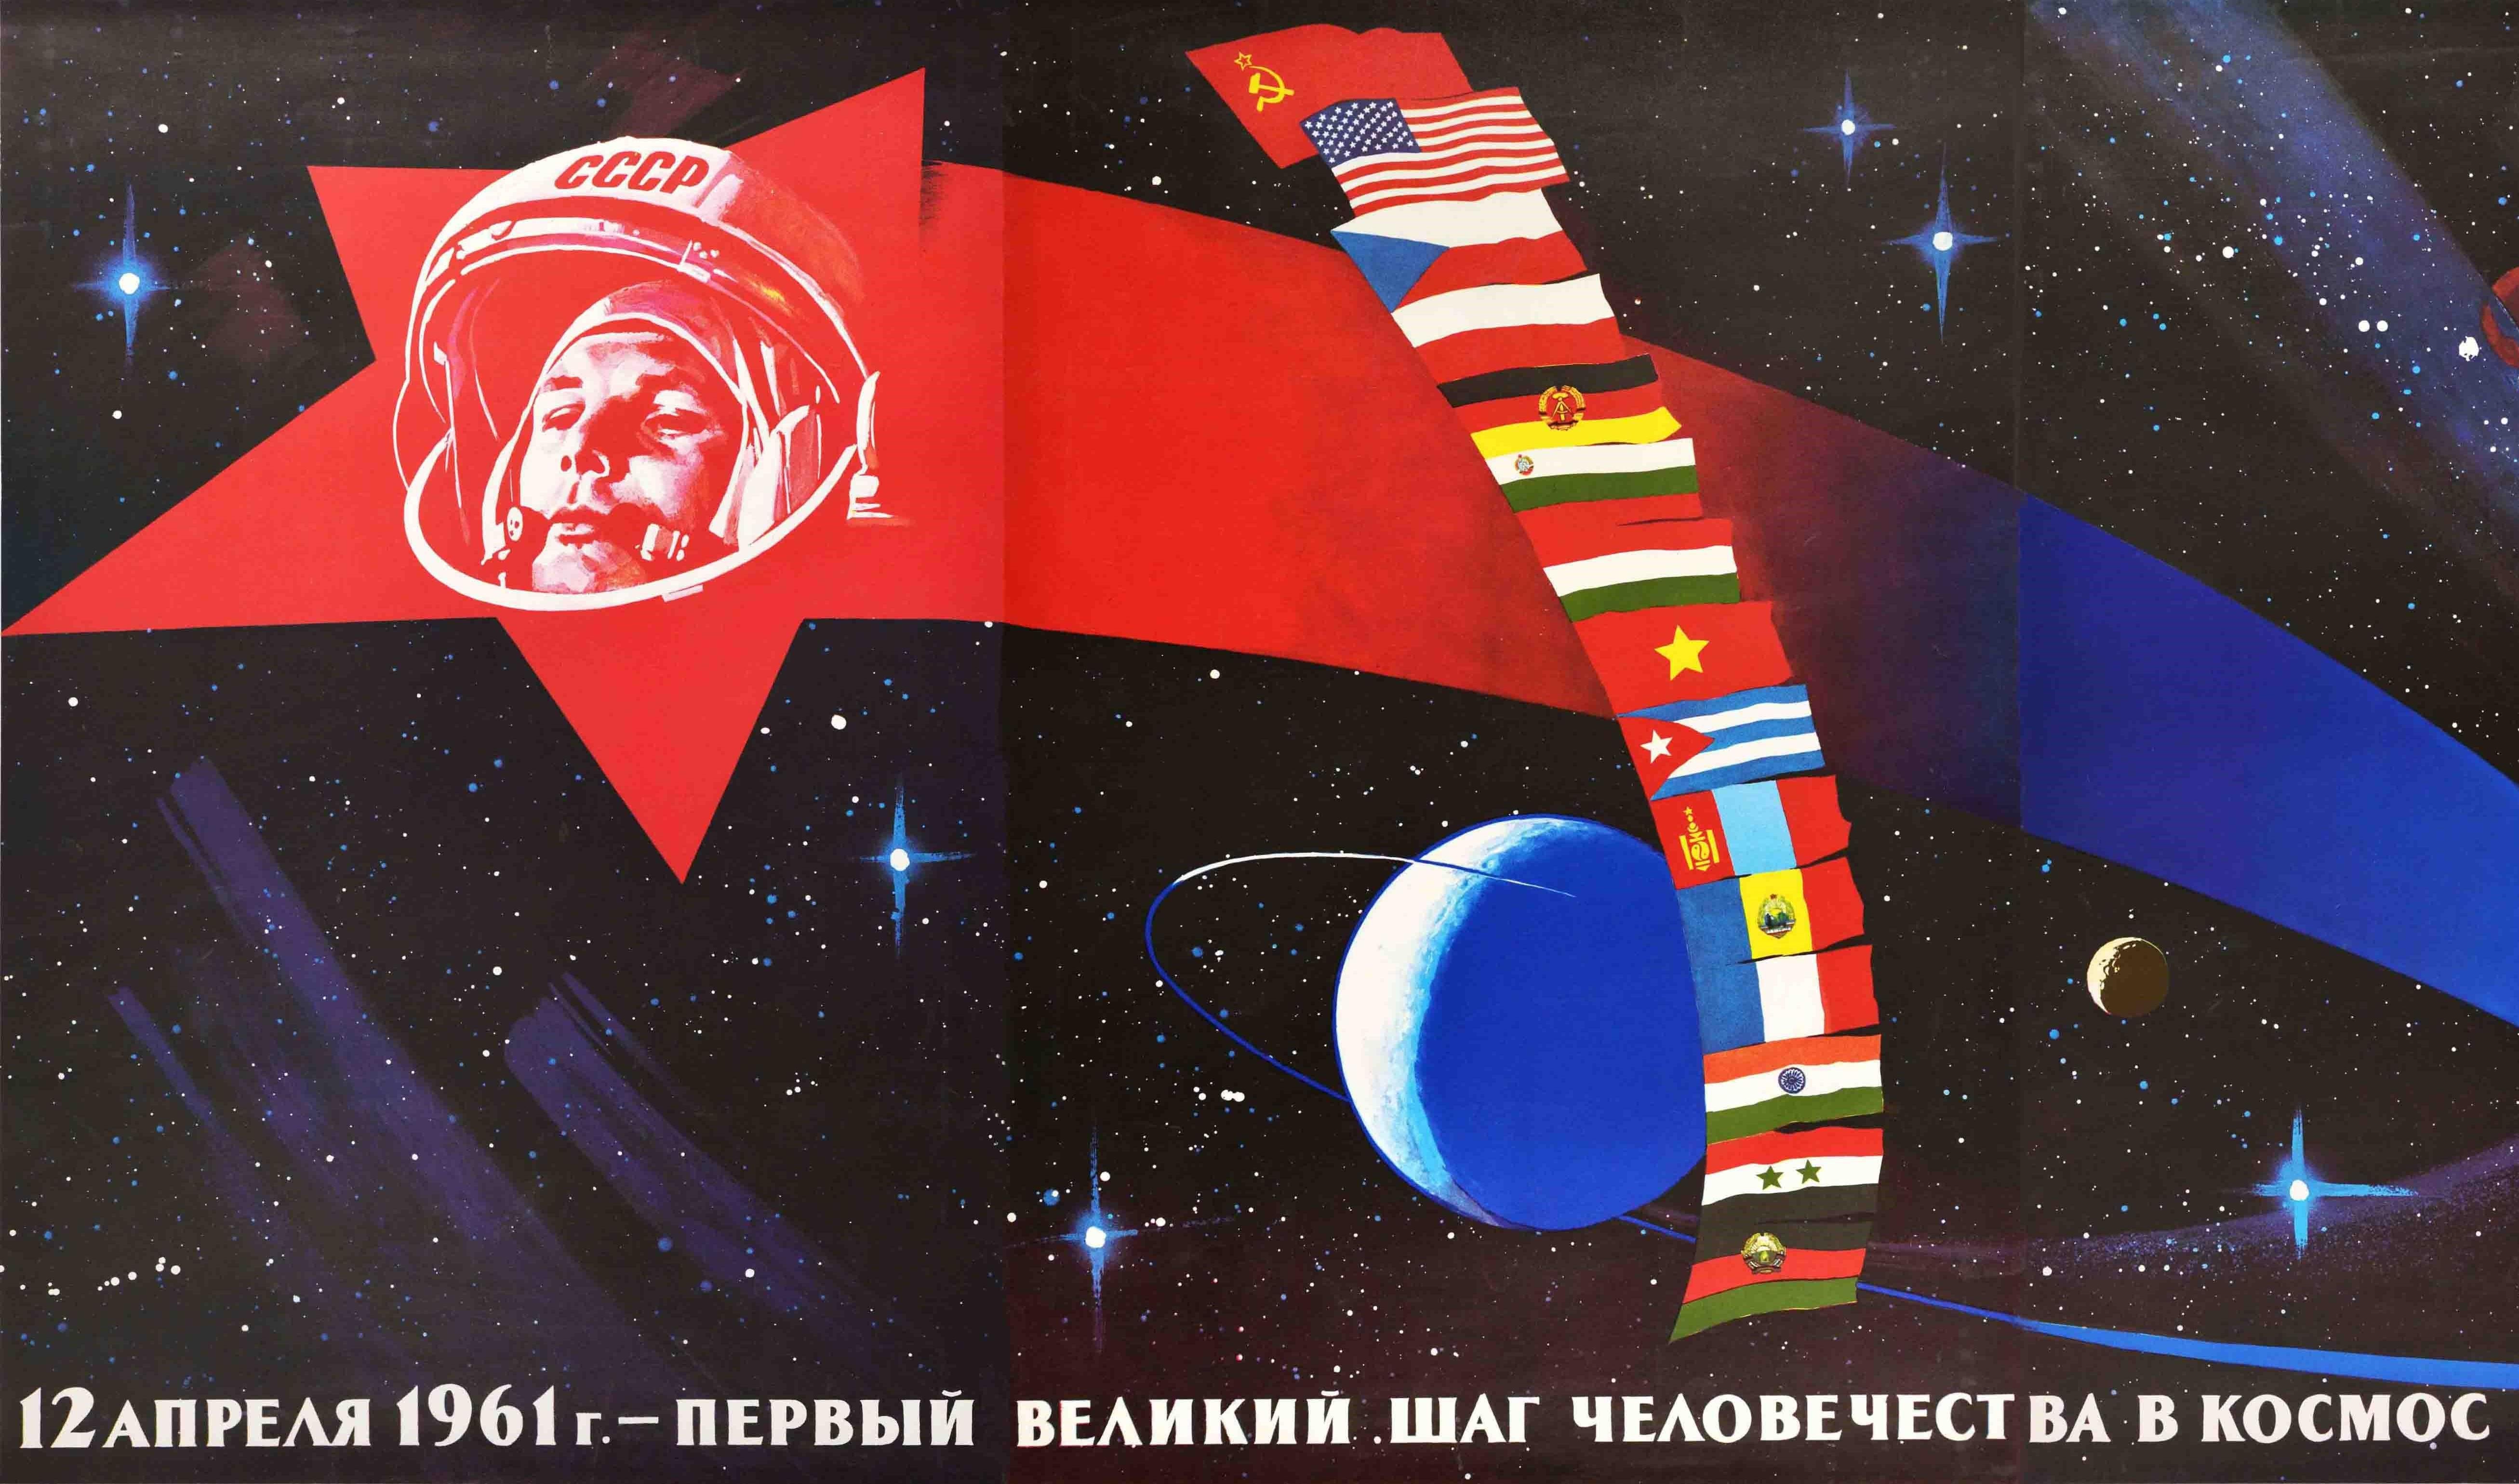 Original vintage Soviet space race propaganda poster - 12 ?????? 1961 ?. ?????? ??????? ??? ???????????? ? ?????? / 12 April 1961 The first great step of mankind into space - promoting the achievements of the Soviet Union and the first man in space